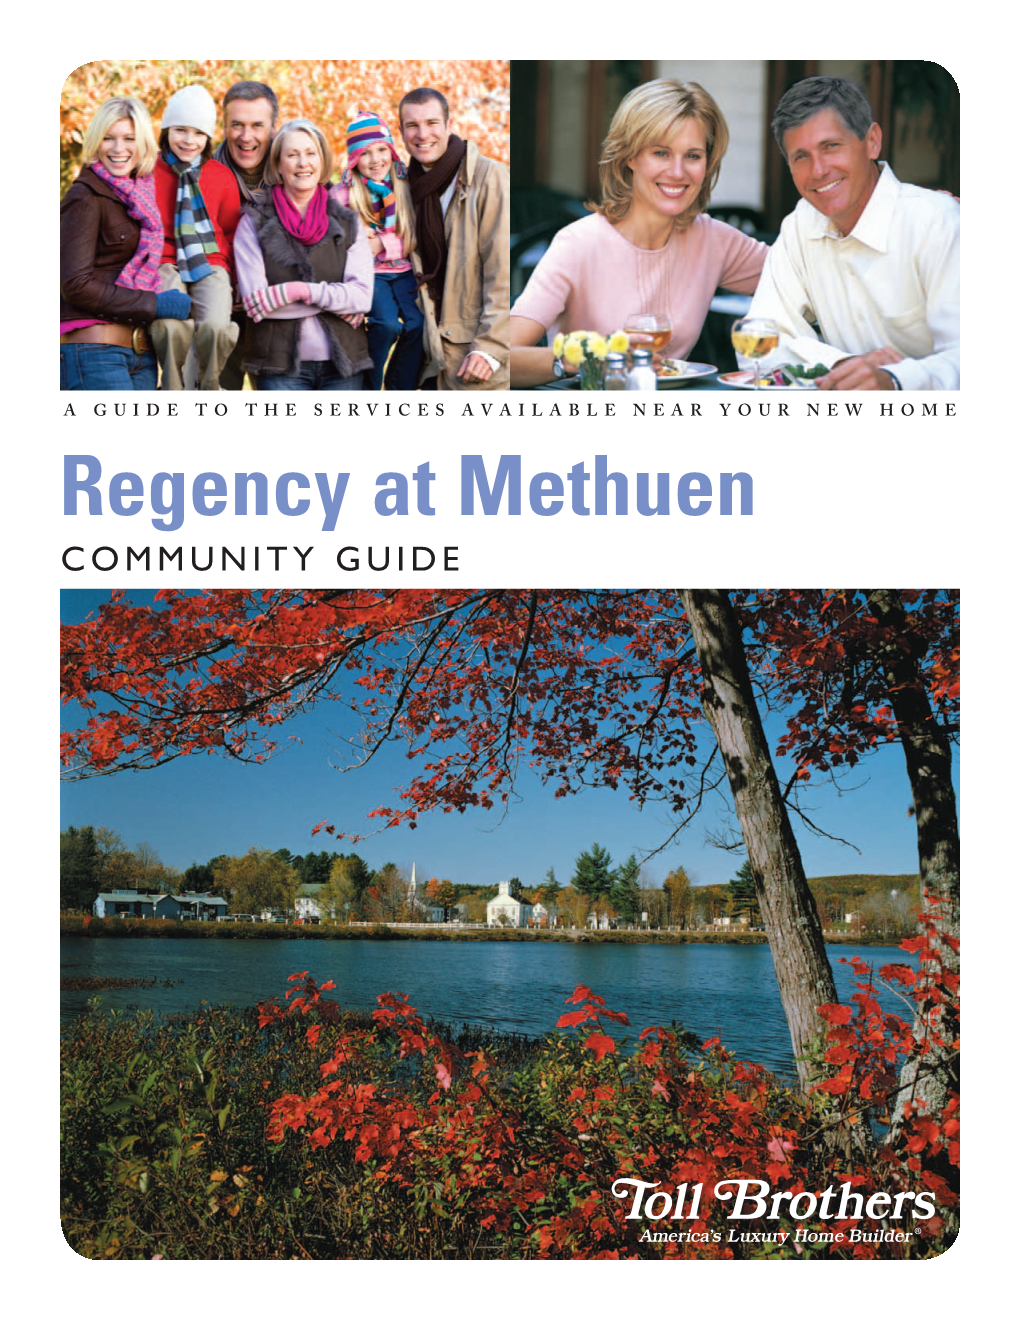 Regency at Methuen Community Guide Copyright 2010 Toll Brothers, Inc